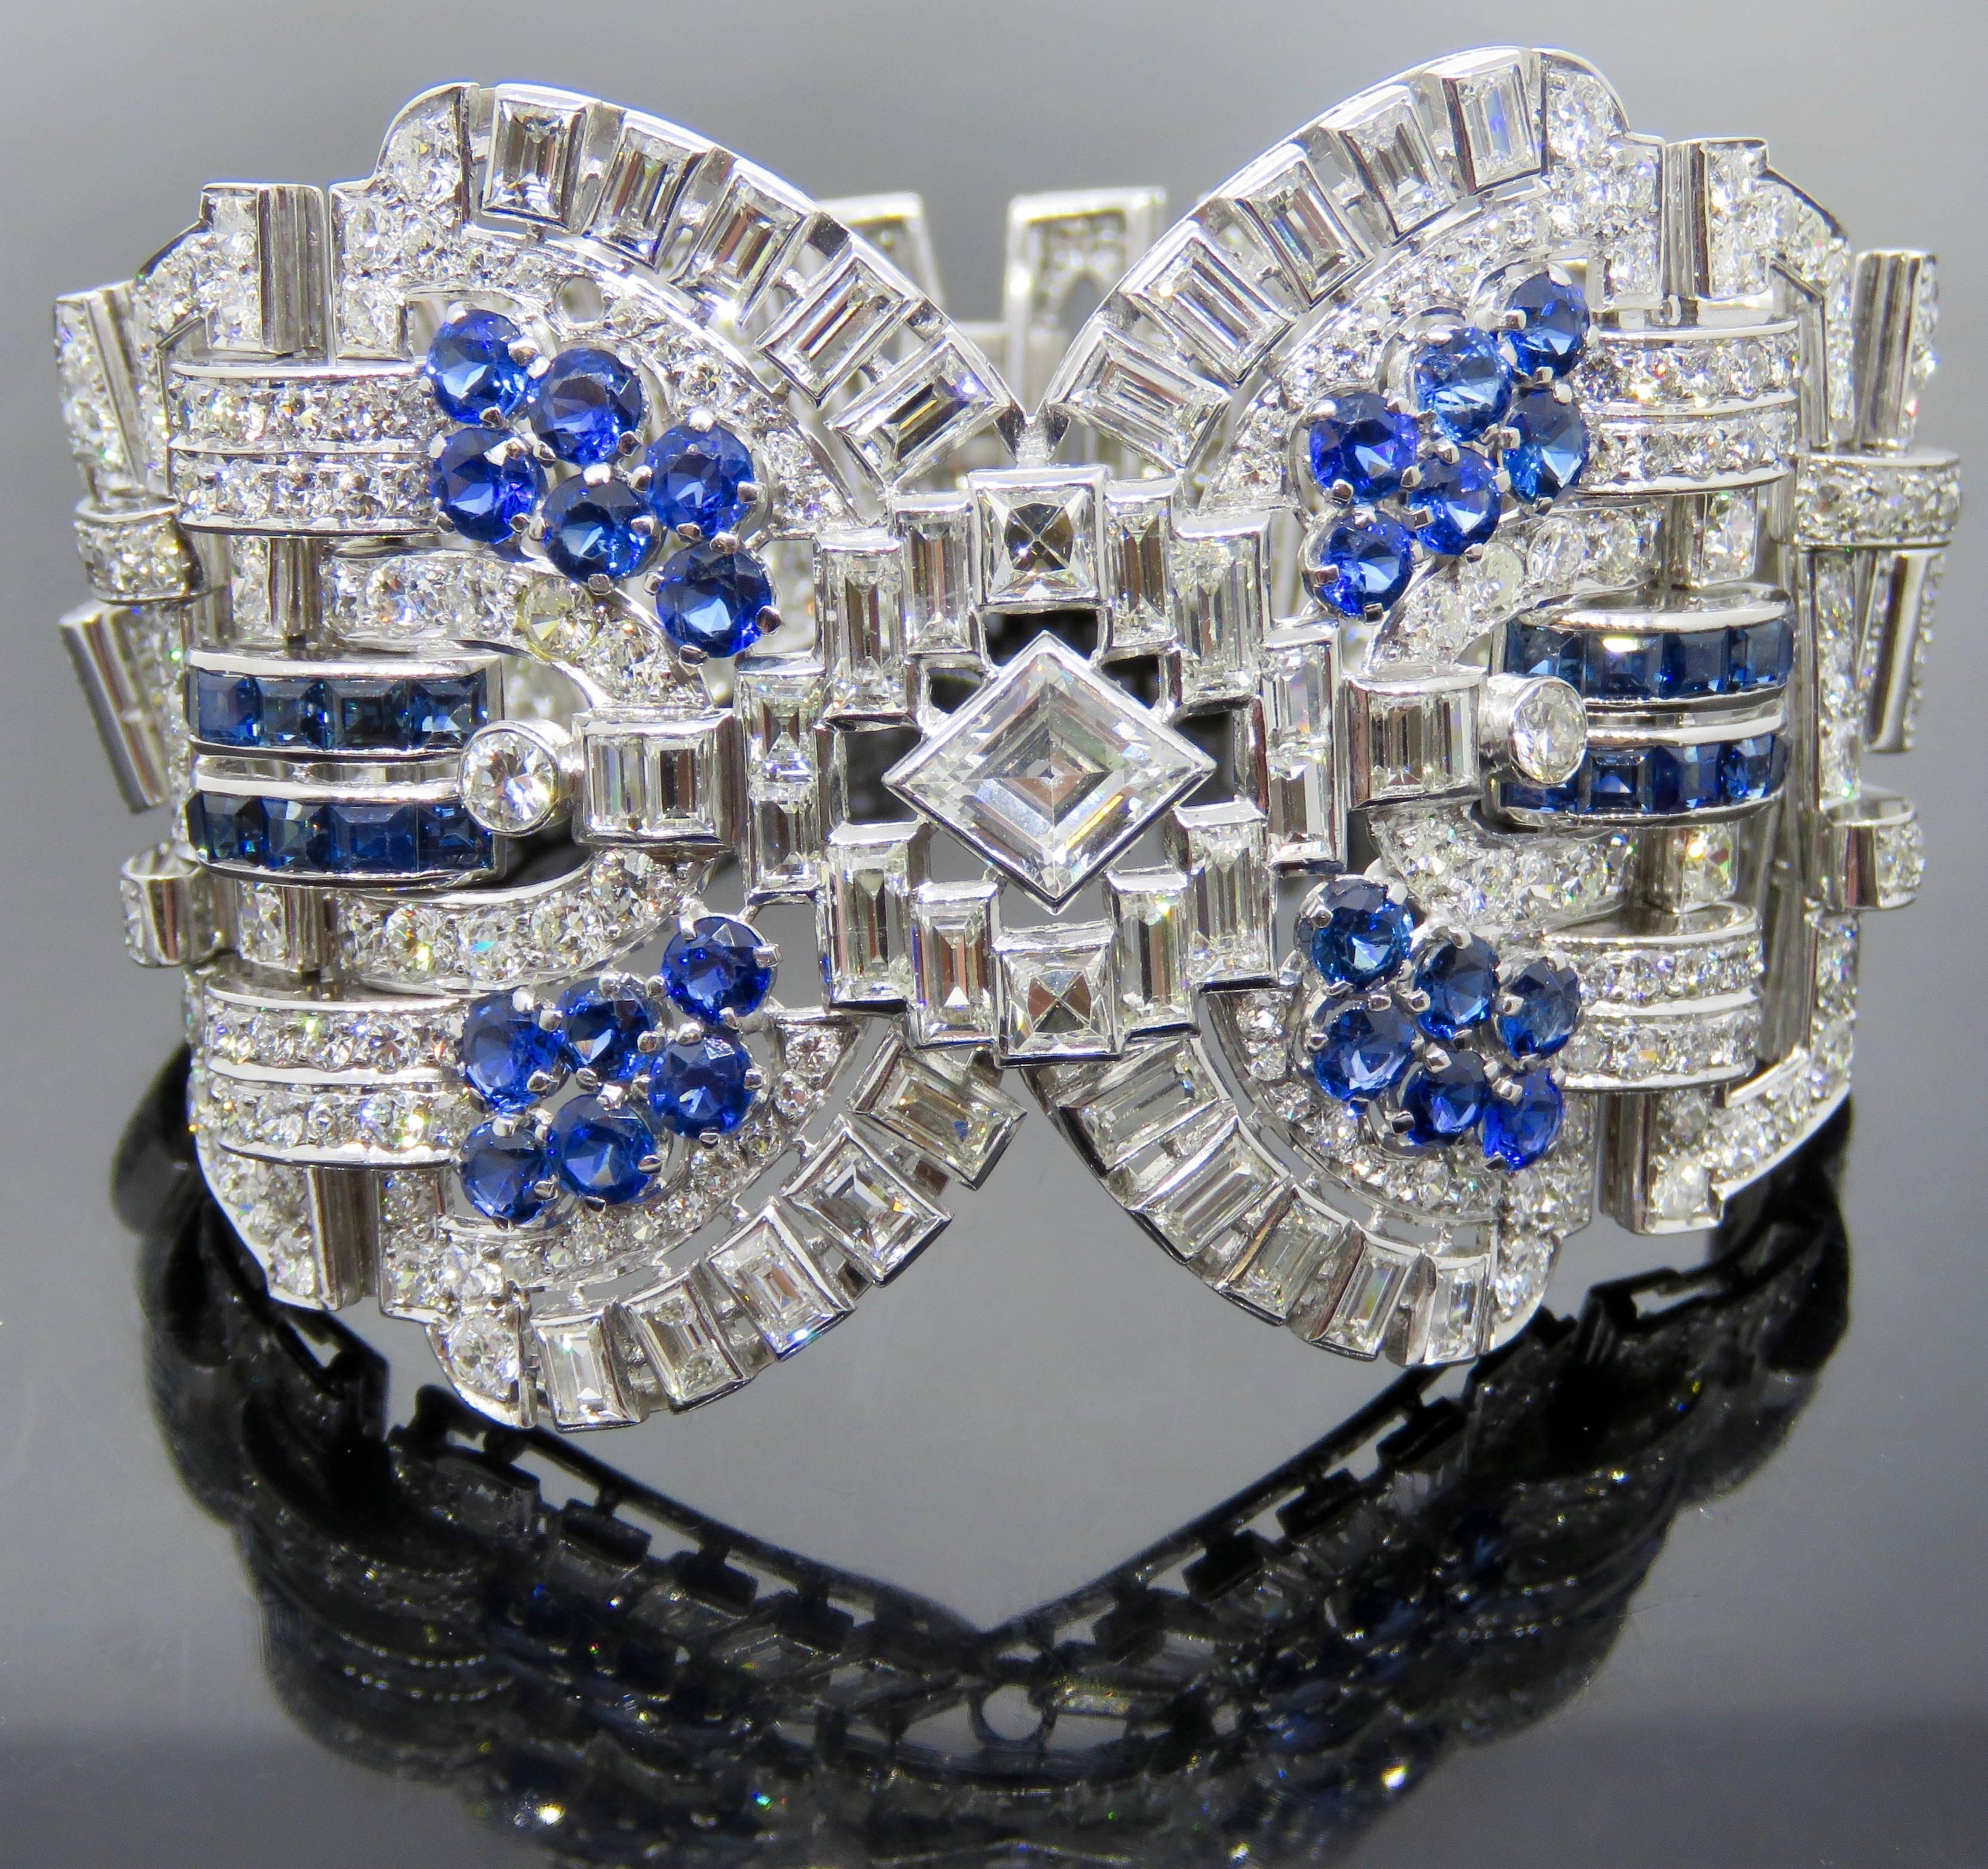 This platinum, diamond piece studded with sapphire stones is the ultimate eyecatcher.